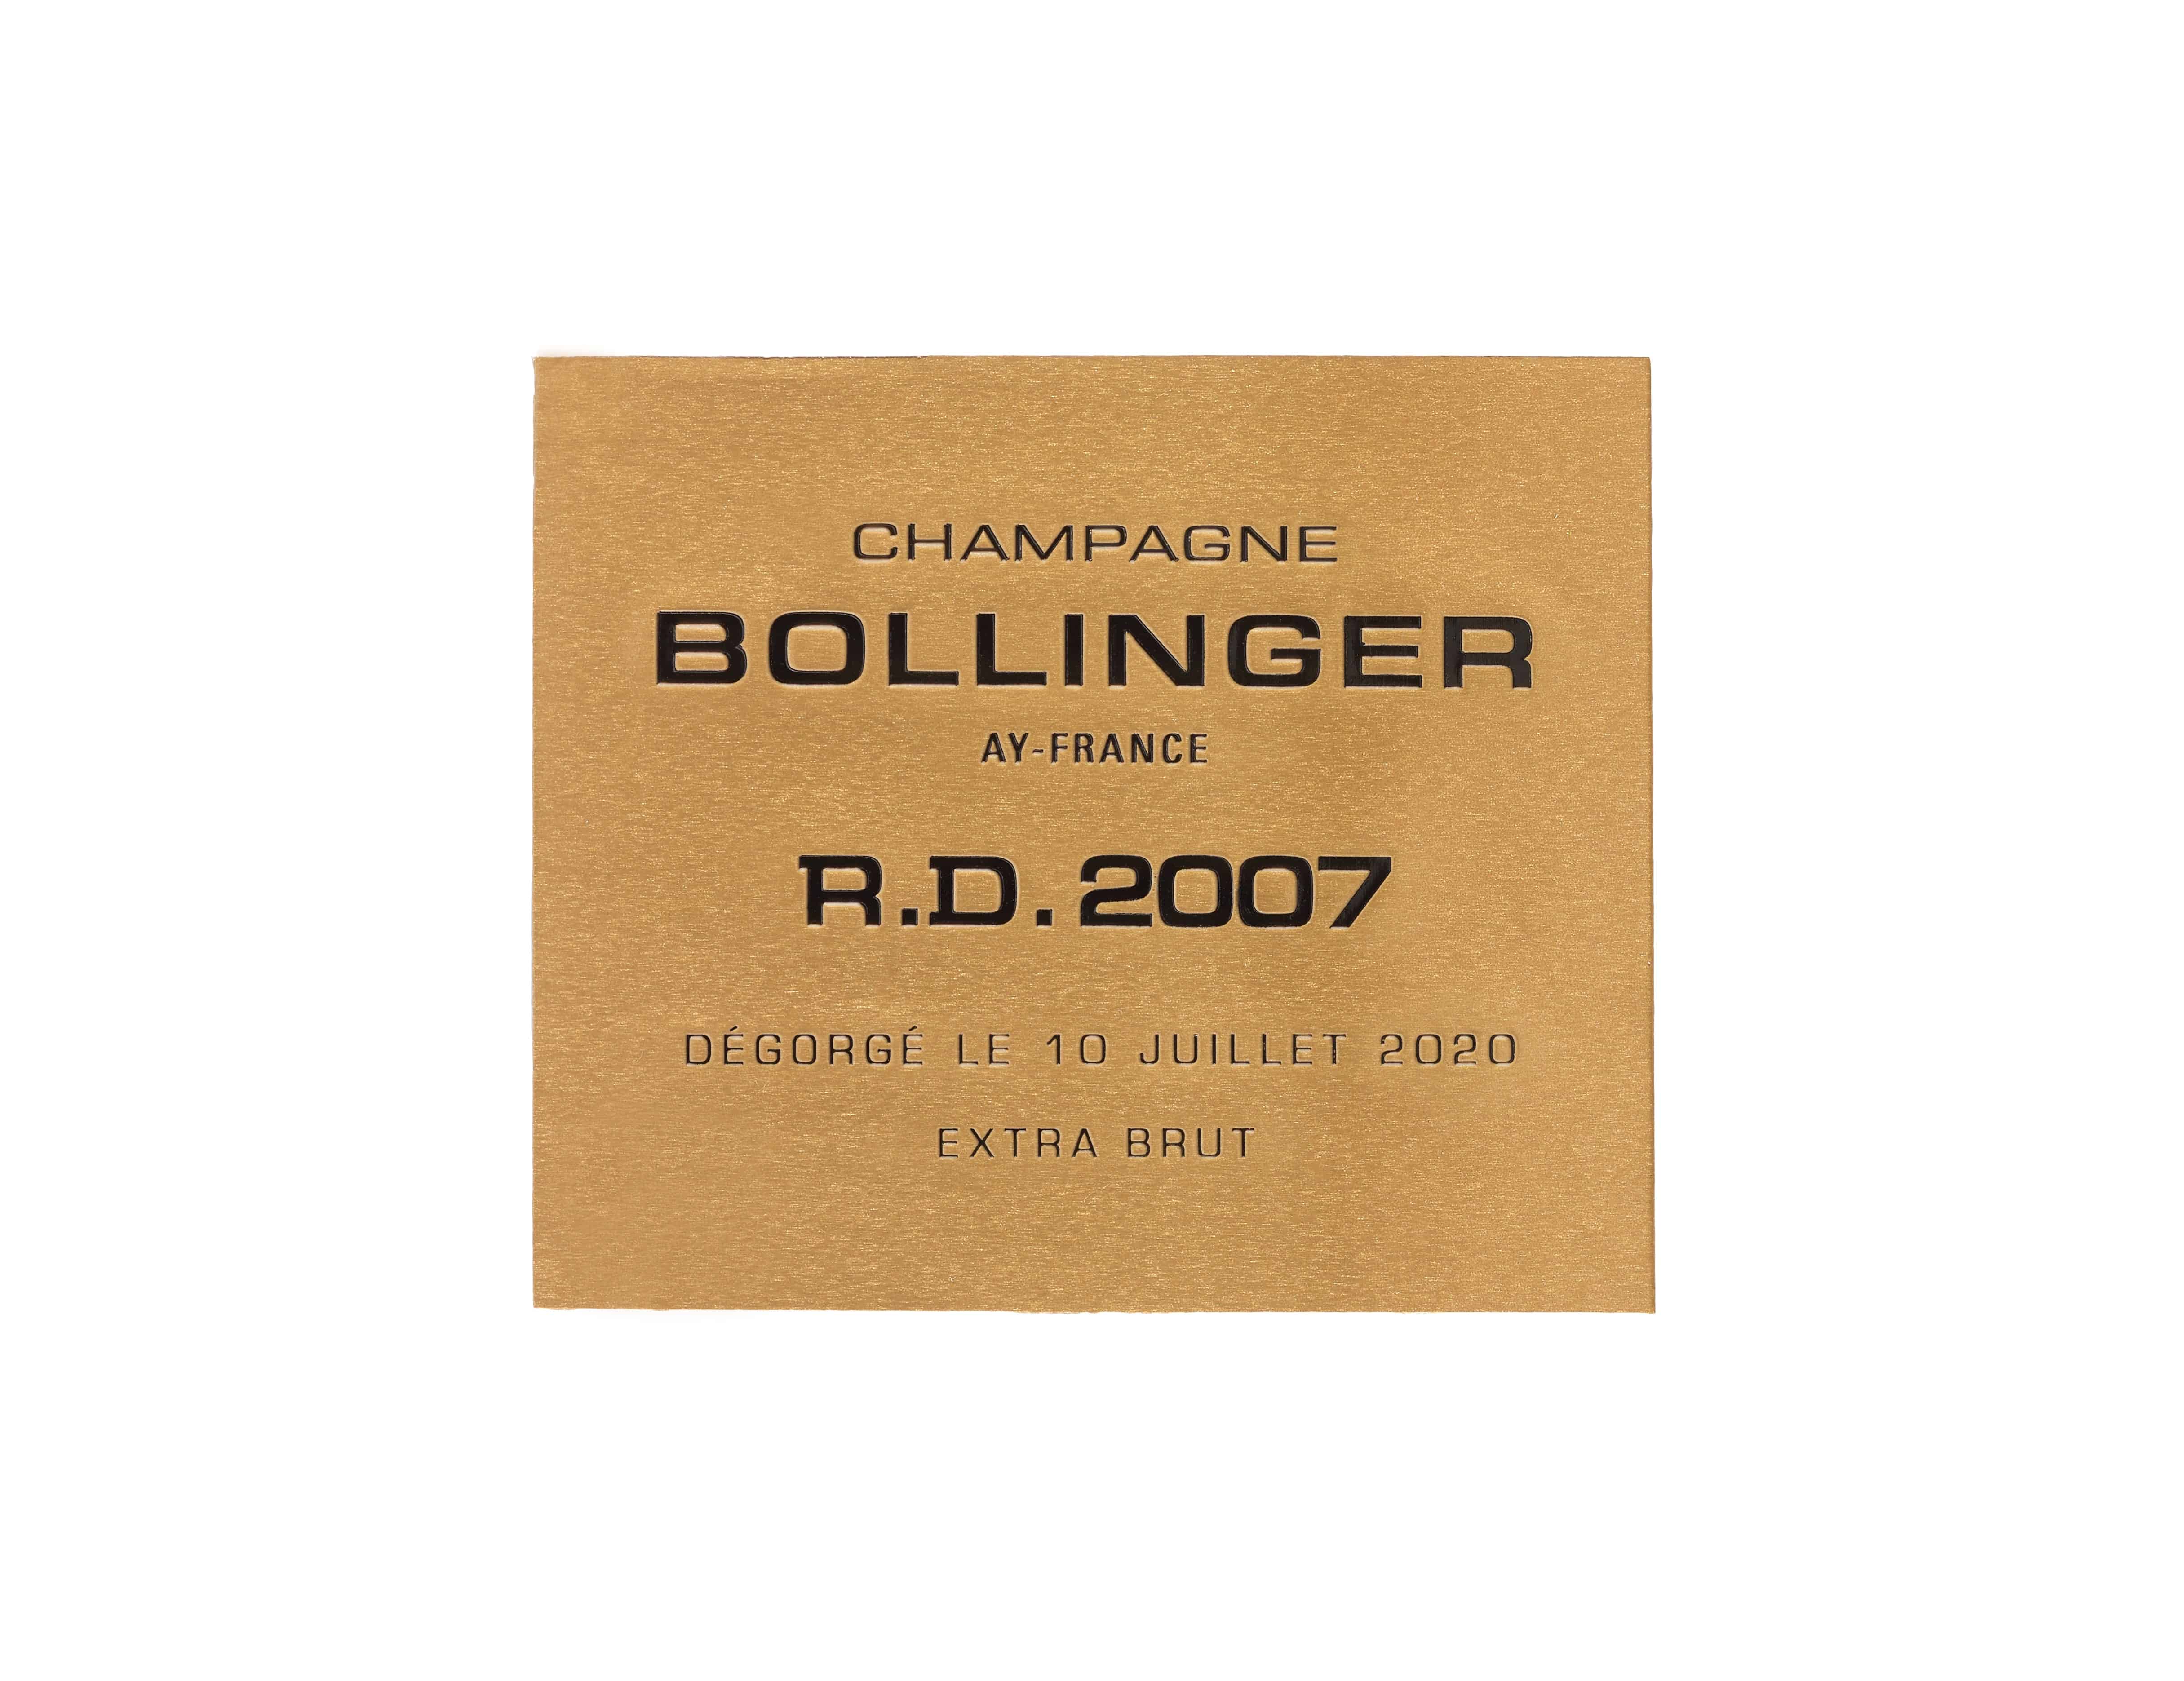 , Bollinger’s RD 2007 is a nod to Madame Lily Bollinger’s ingenuity